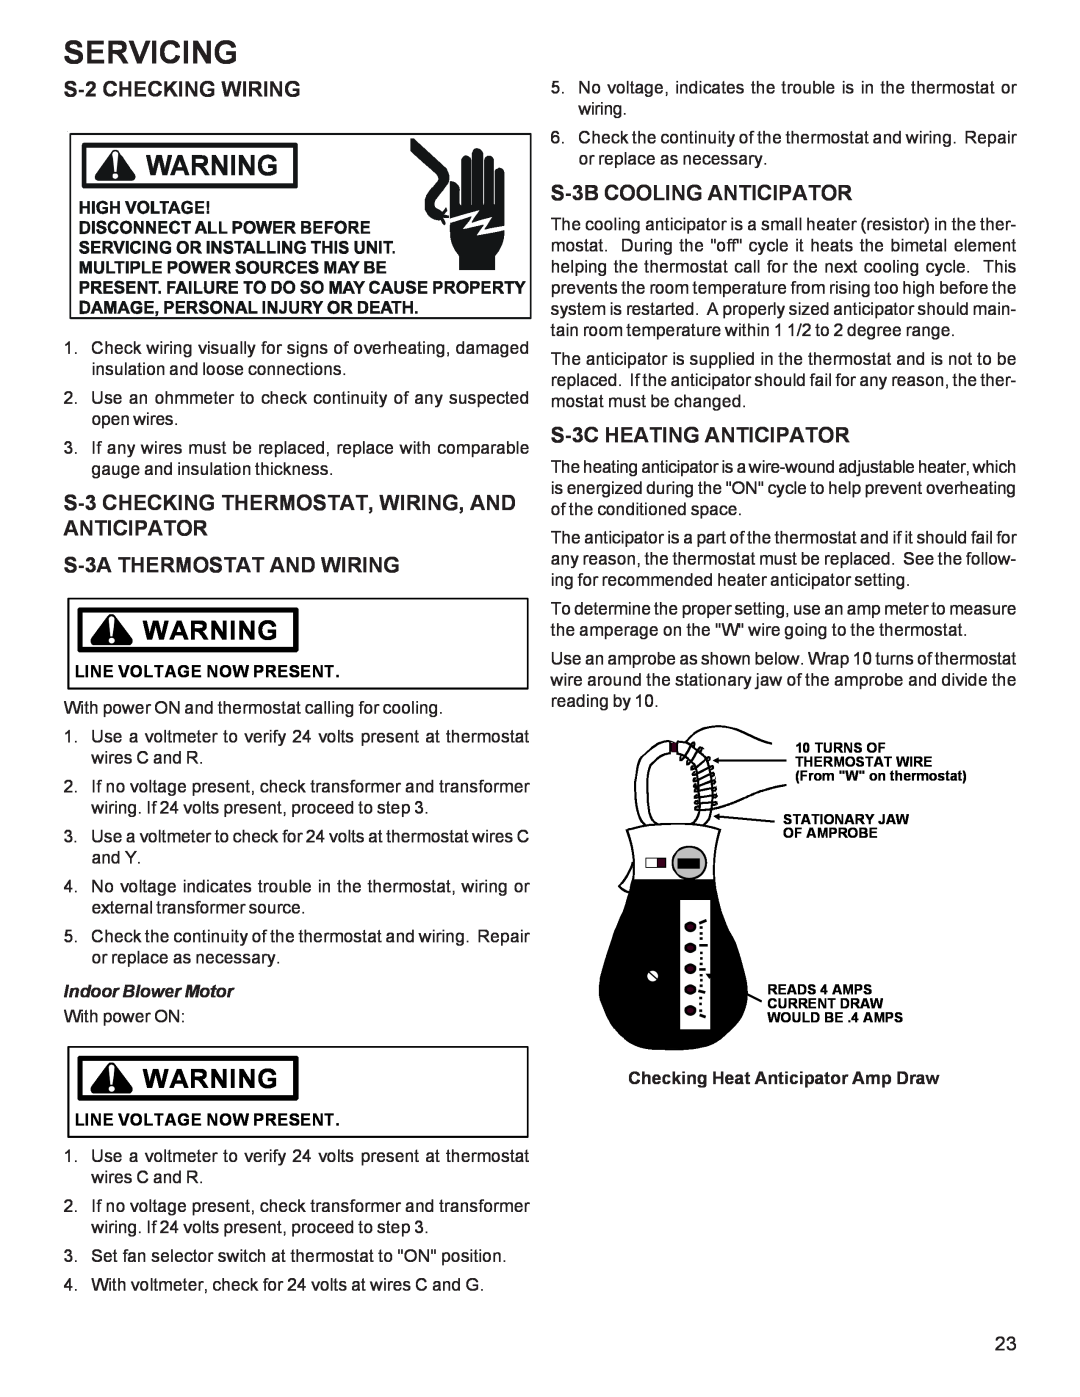 Goodman Mfg R-410A manual S-2CHECKING WIRING, S-3CHECKING THERMOSTAT, WIRING, AND ANTICIPATOR, S-3ATHERMOSTAT AND WIRING 